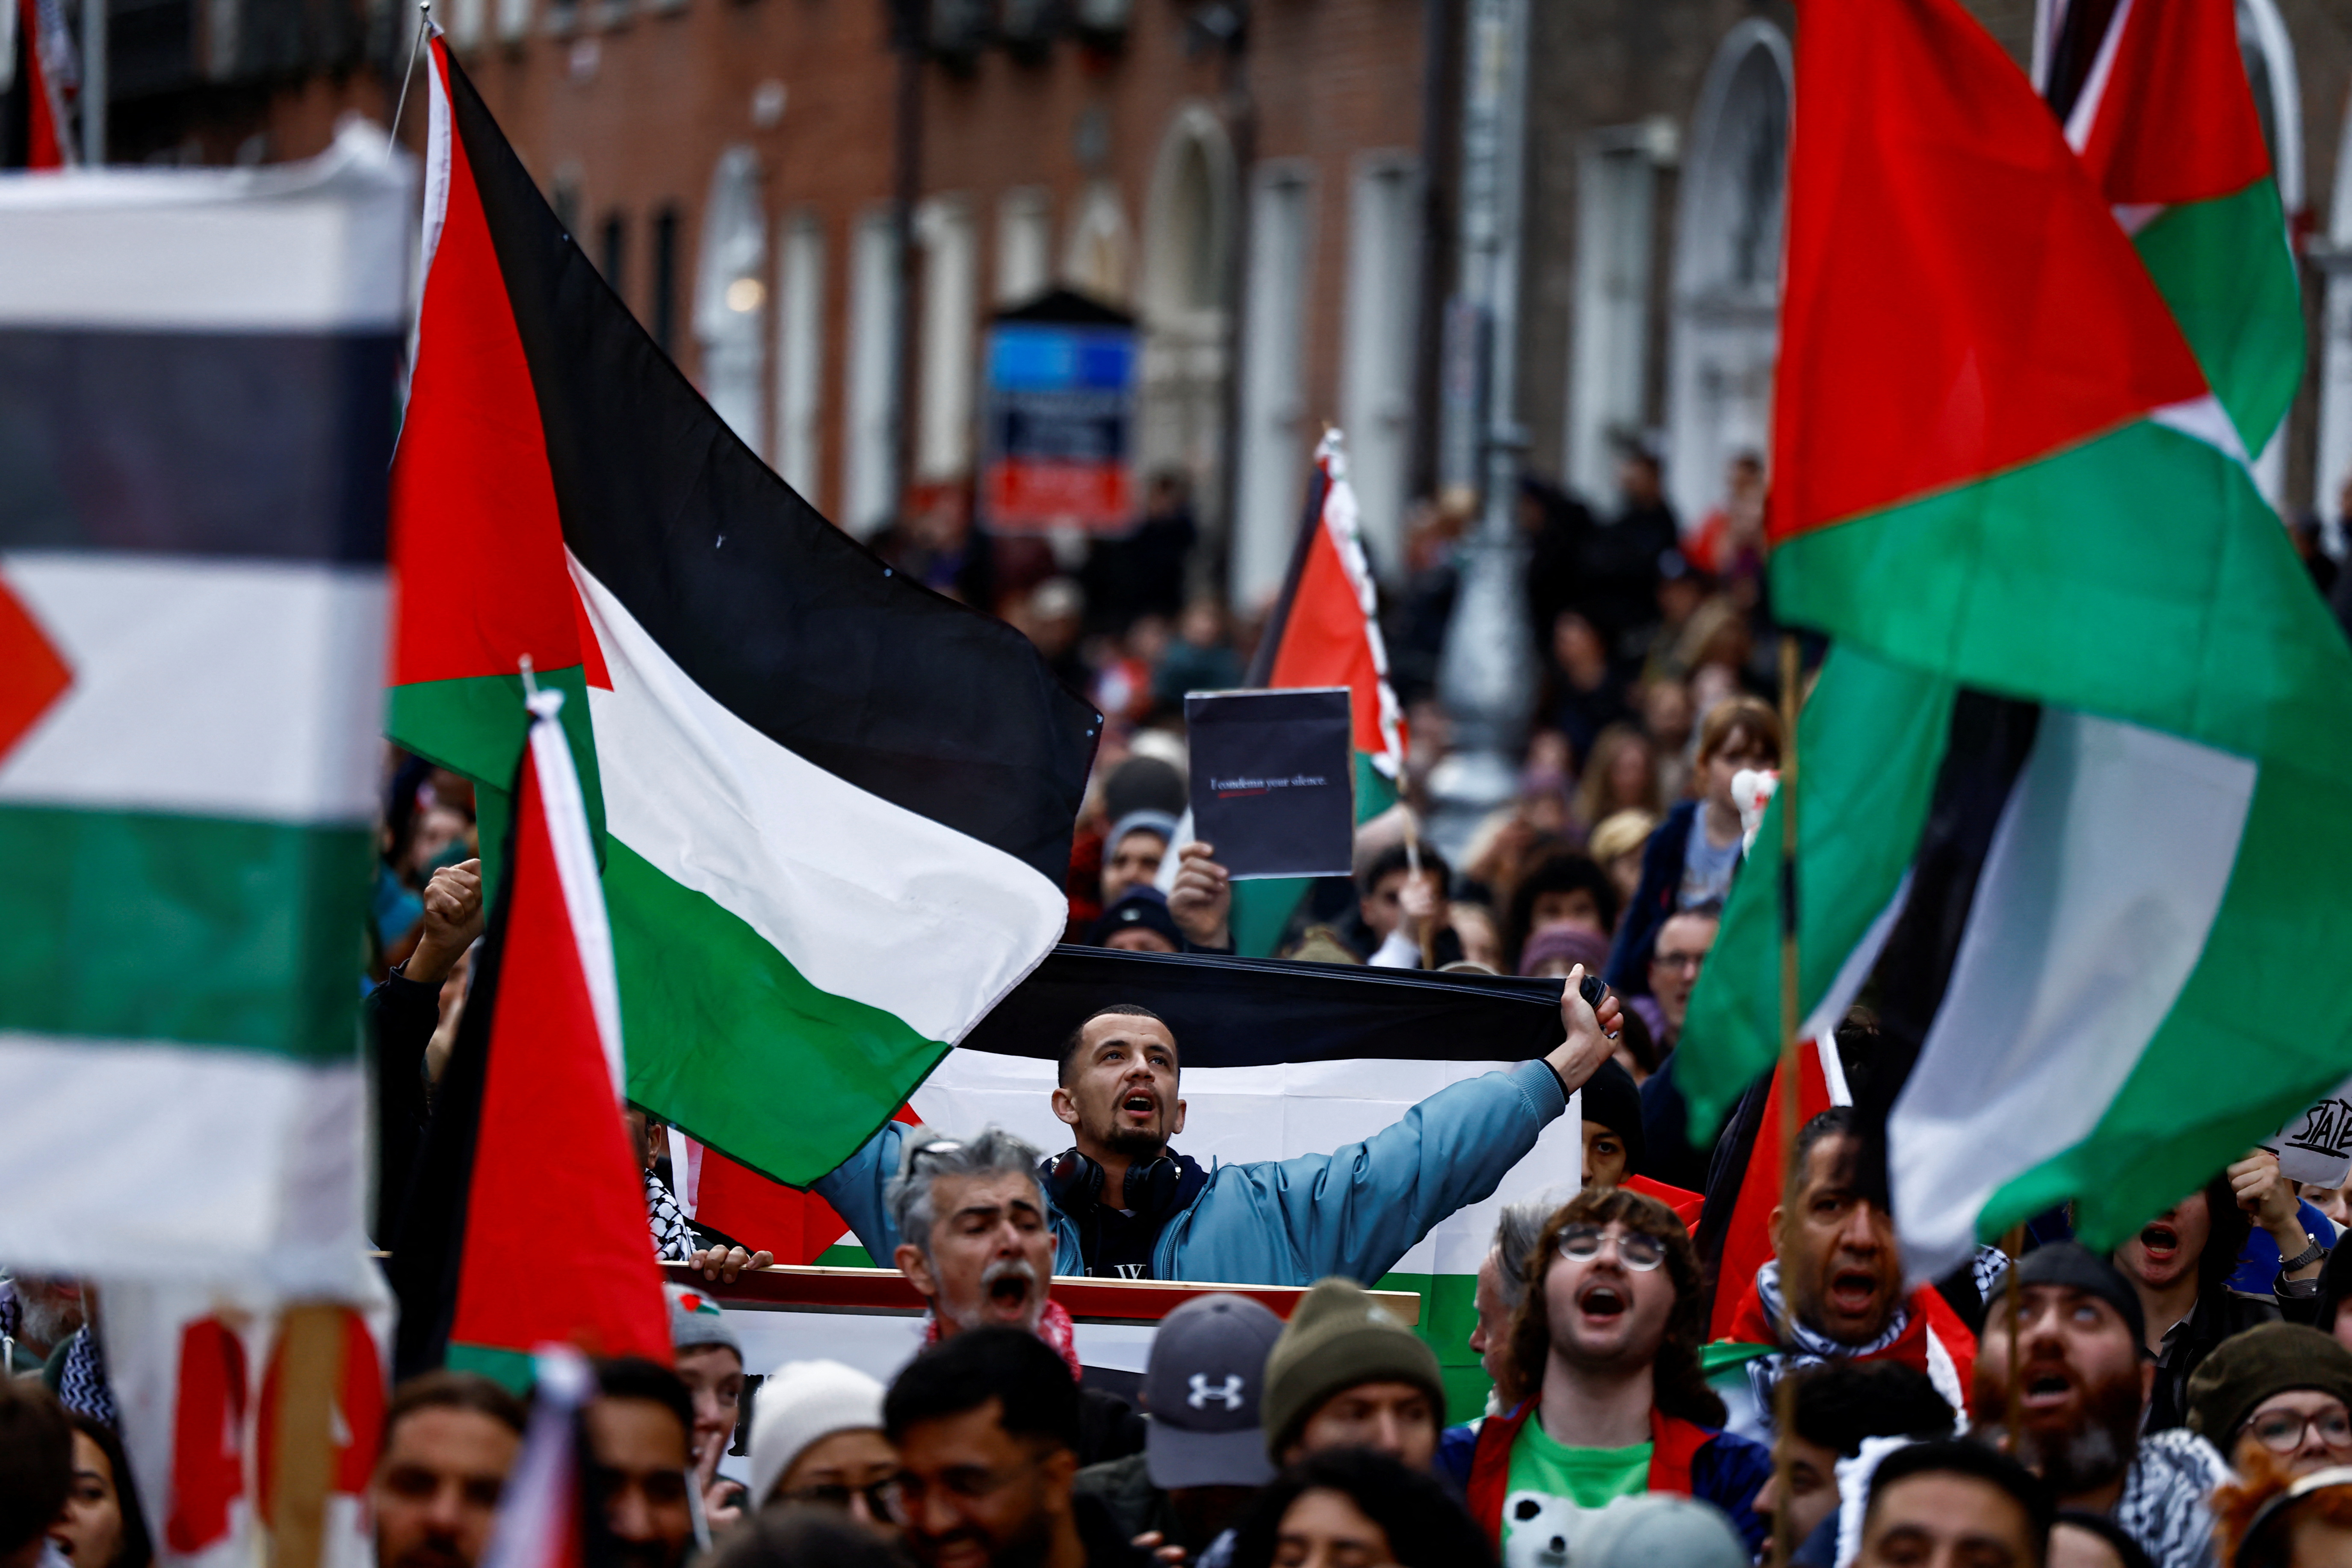 Demonstration in solidarity with Palestinians in Gaza, in Dublin